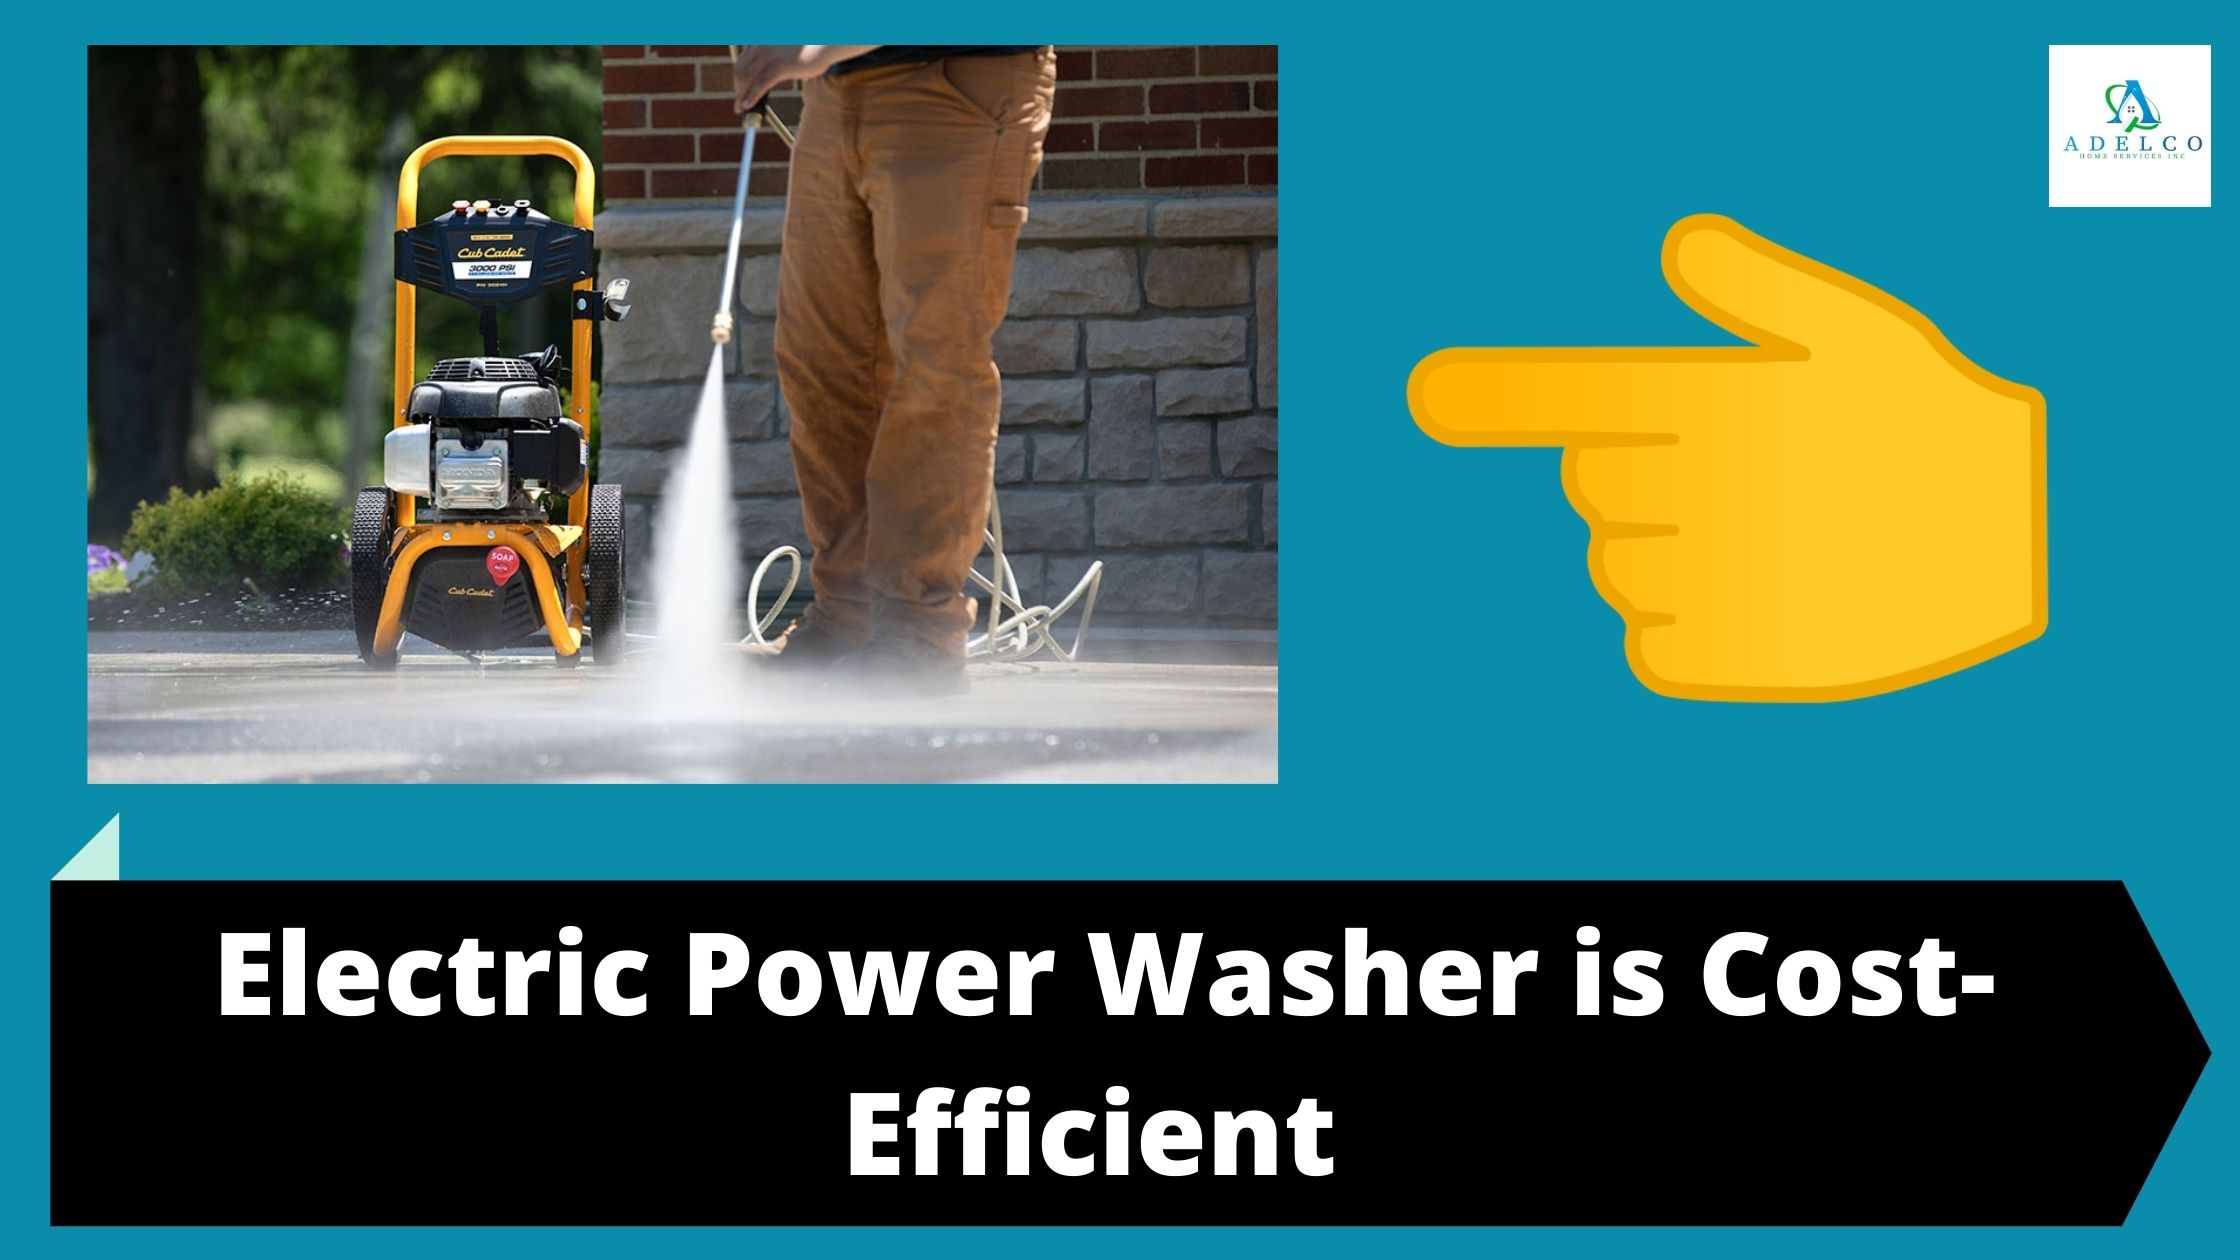 Electric Power Washer is Cost-Efficient